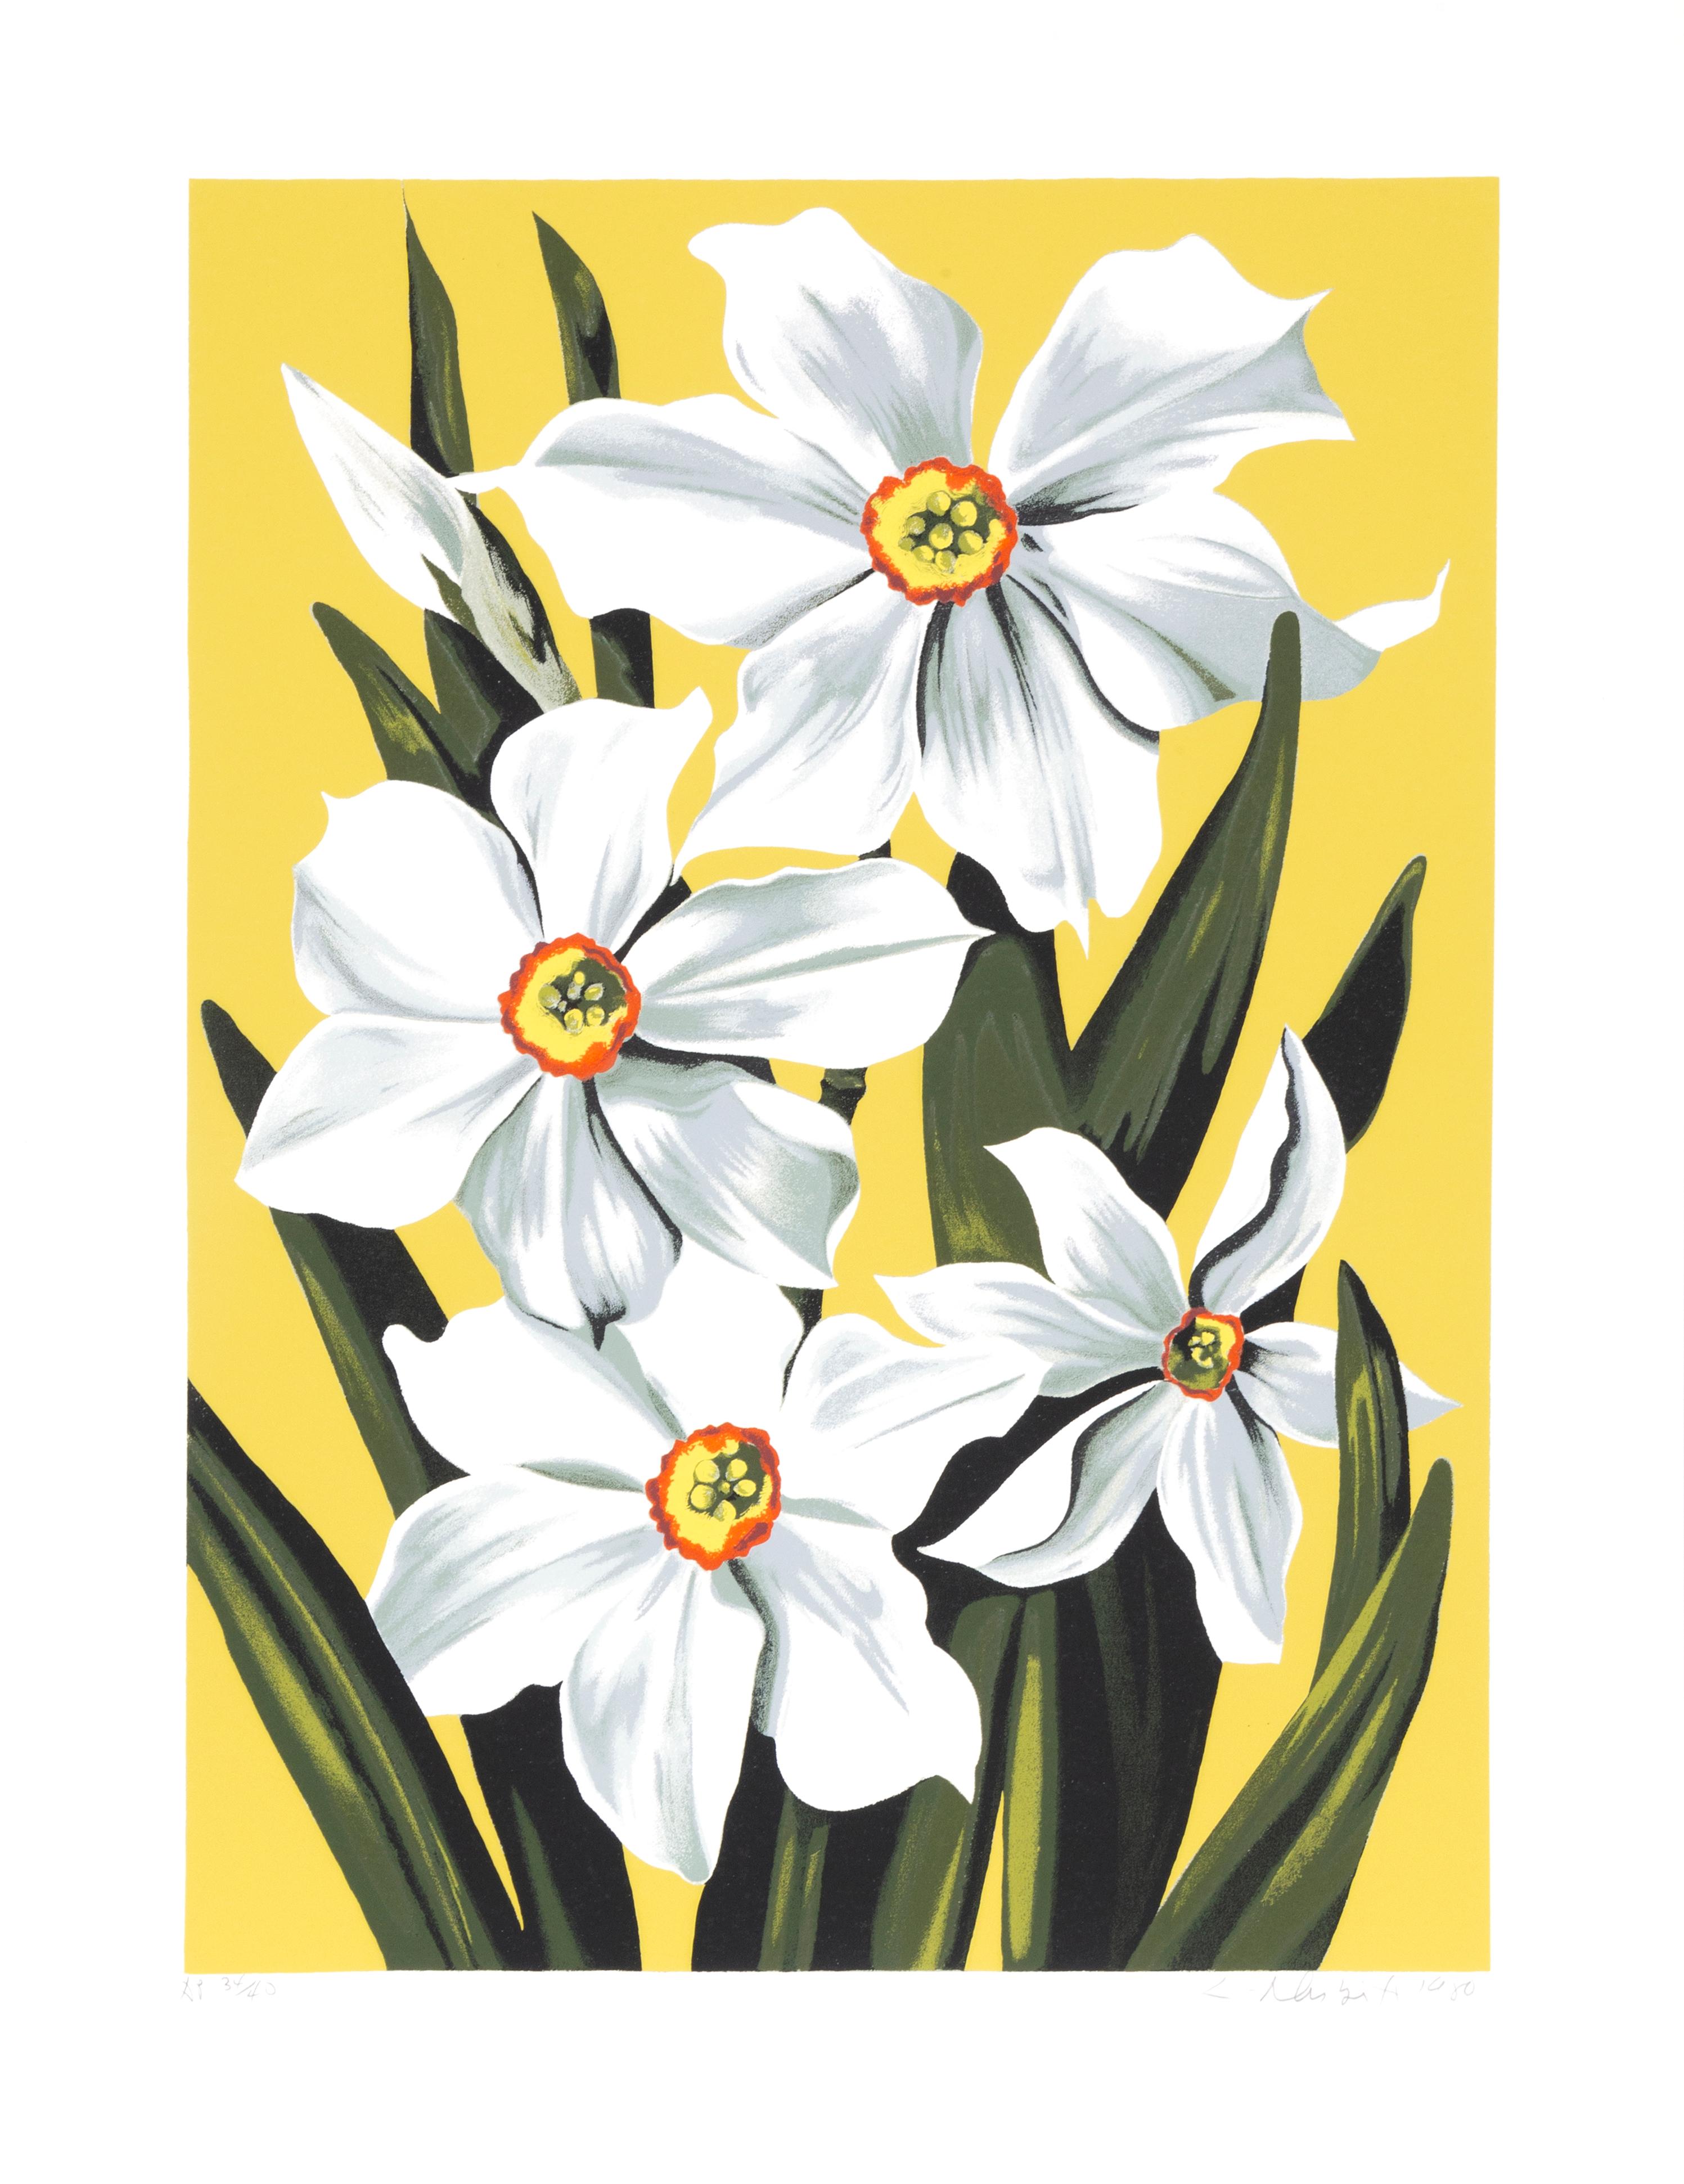 Artist: Lowell Blair Nesbitt, American (1933 - 1993)
Title: Daffodils
Year: 1980
Medium: Serigraph, signed and numbered in pencil
Edition: 200
Image Size: 28 x 20 inches
Size: 35 in. x 26 in. (88.9 cm x 66.04 cm)